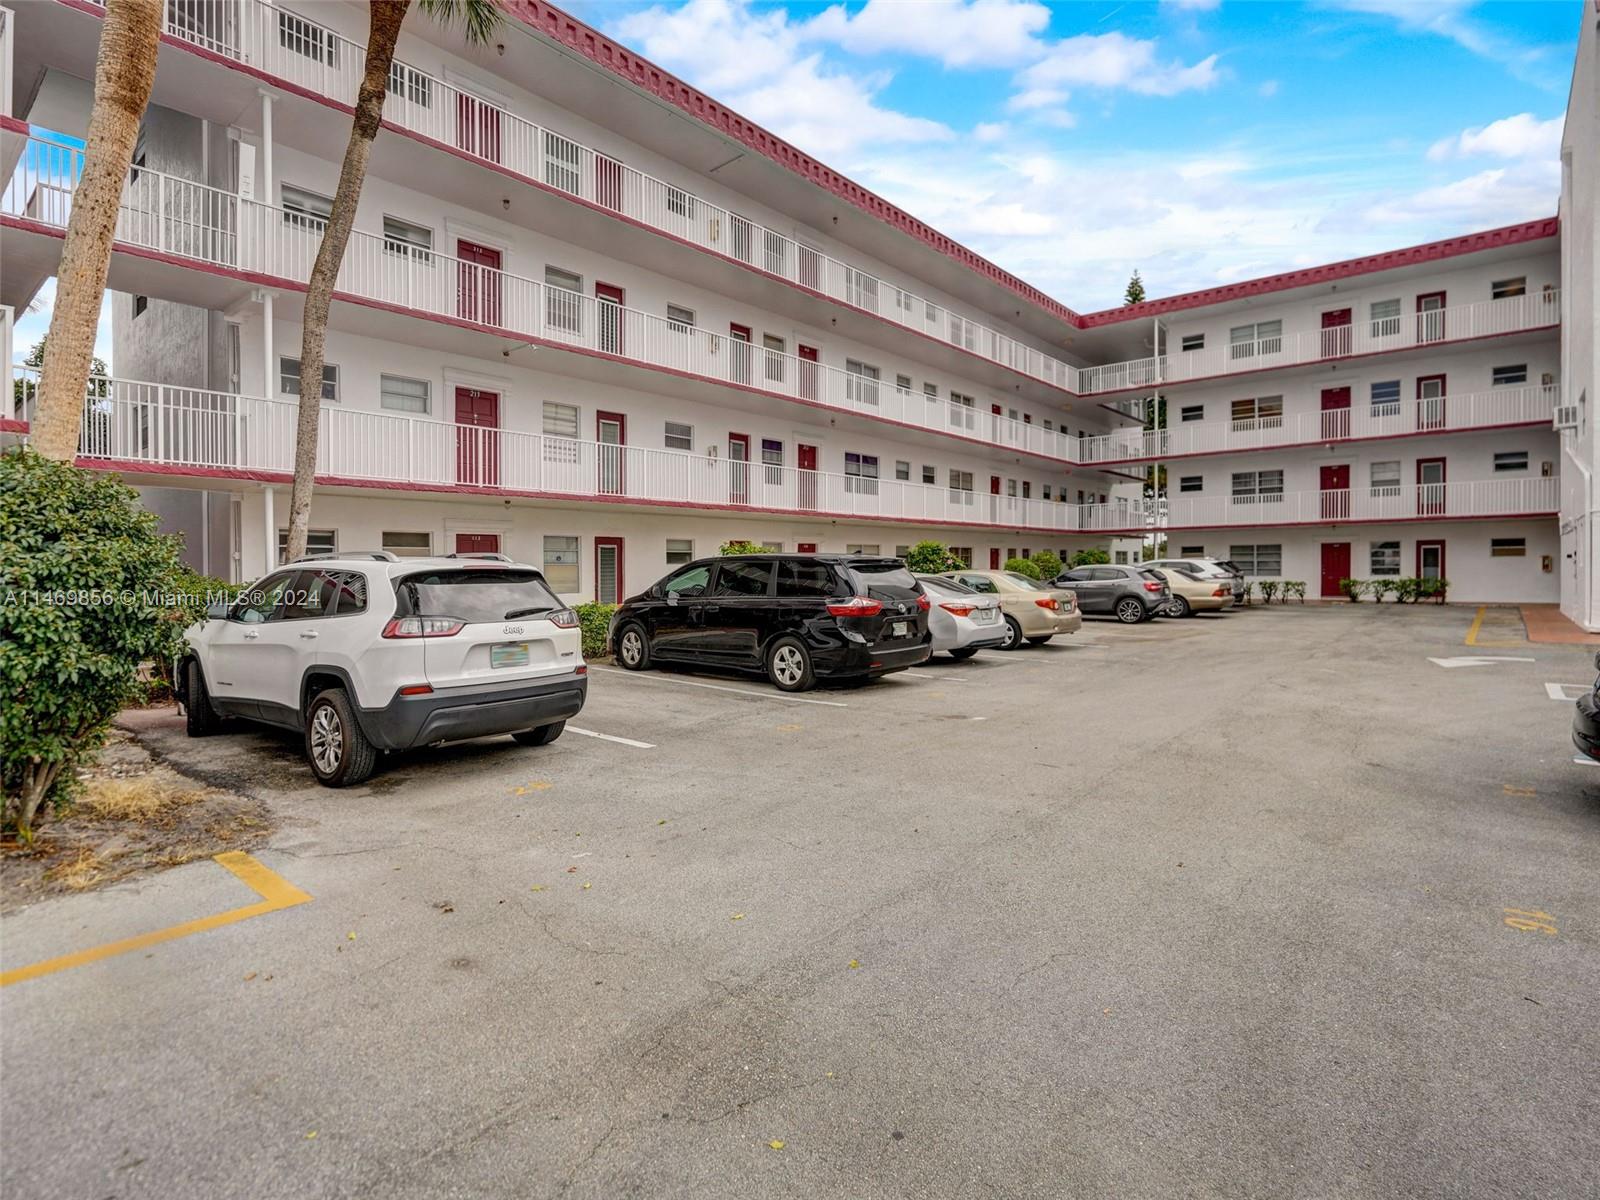 4270 NW 40th St 313, Lauderdale Lakes, Florida 33319, 1 Bedroom Bedrooms, ,1 BathroomBathrooms,Residential,For Sale,4270 NW 40th St 313,A11469856